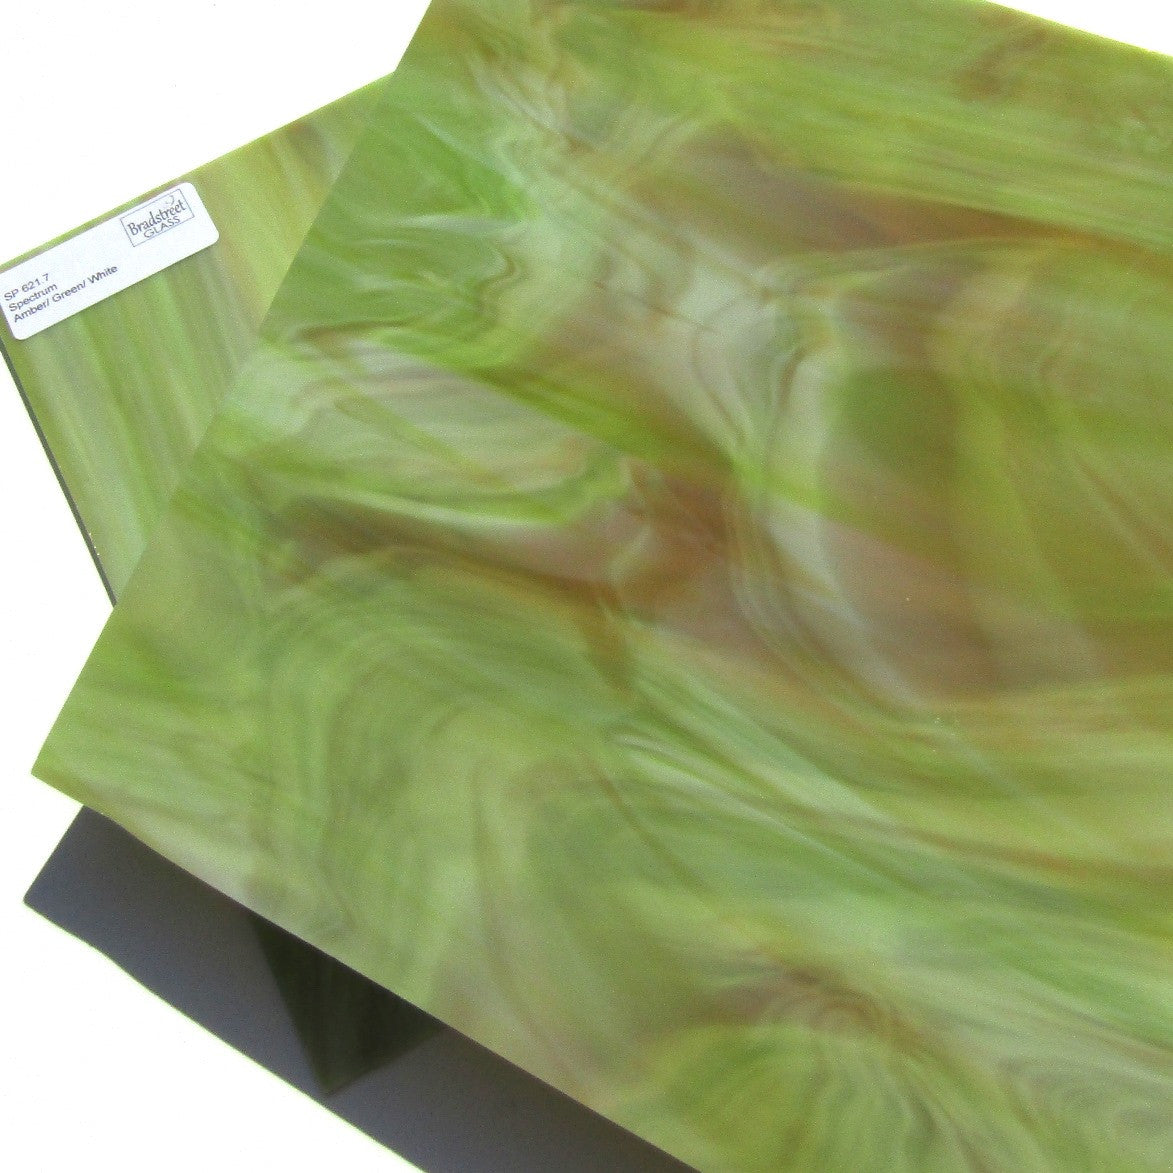 Spectrum 621.7 Stained Glass Sheet Opaque Streaky Swirled Amber Green White Opal